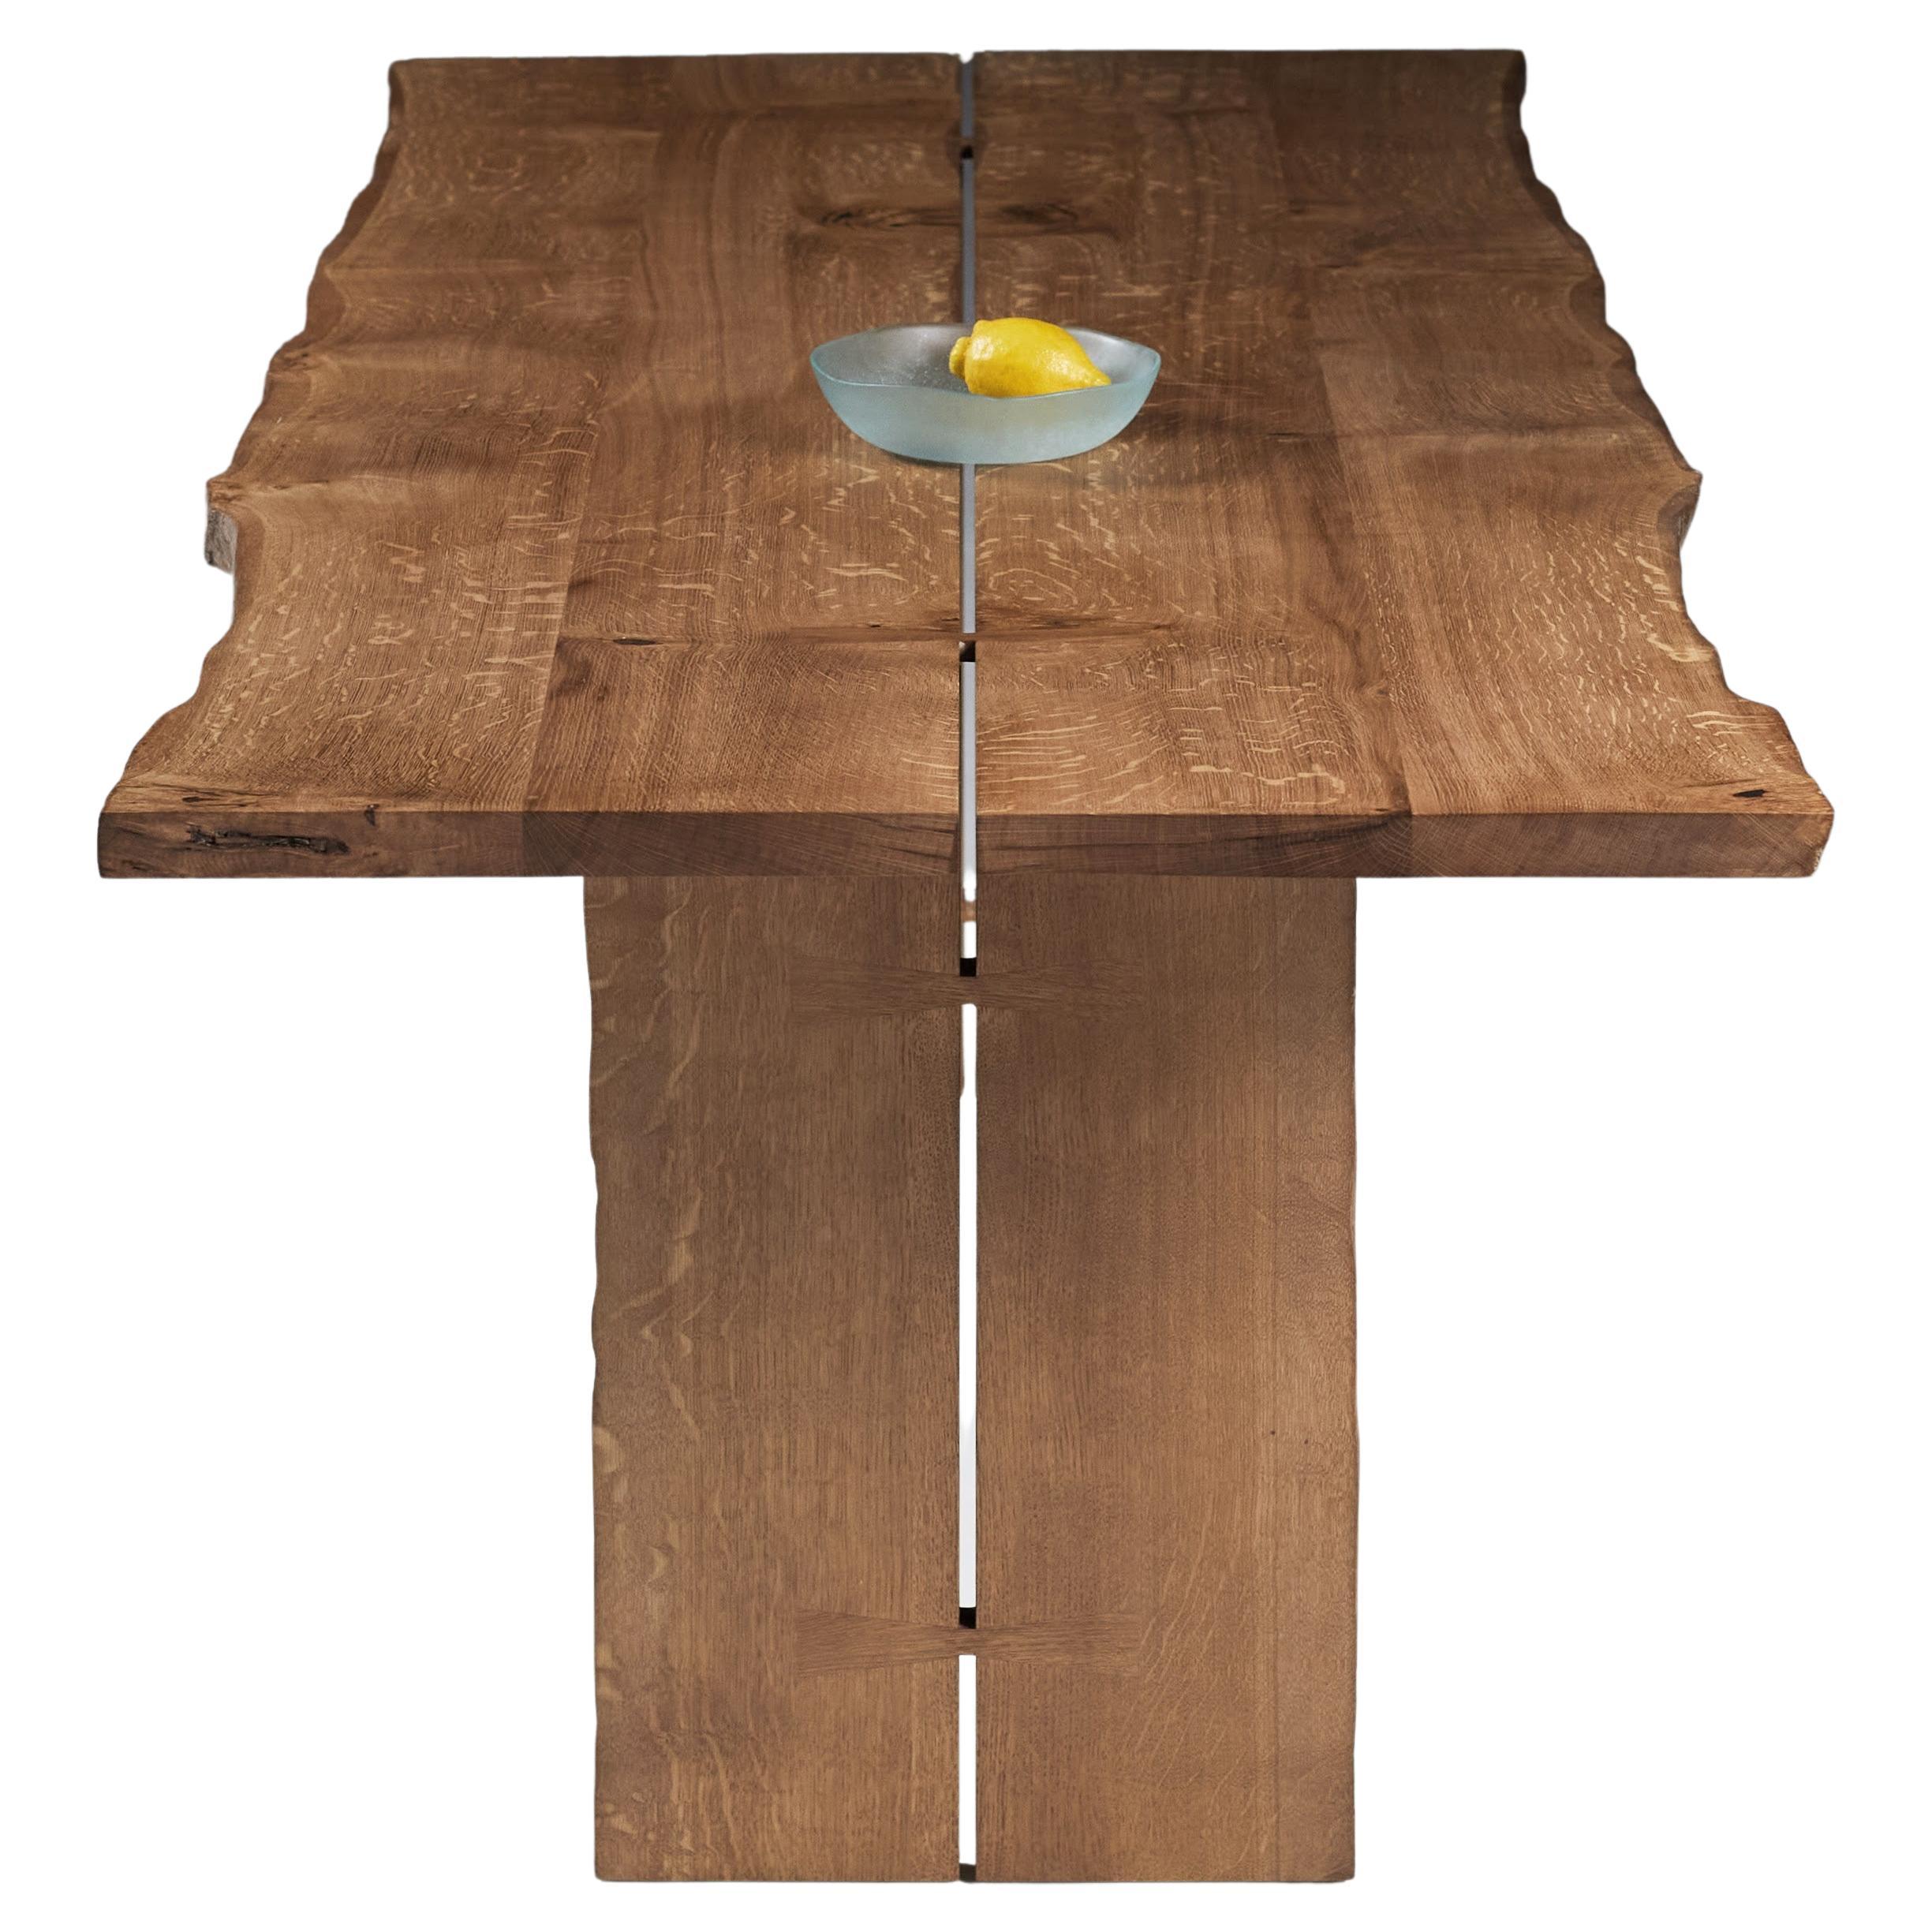 The 'Additions' butterfly joined table with live-edge English Oak. For Sale